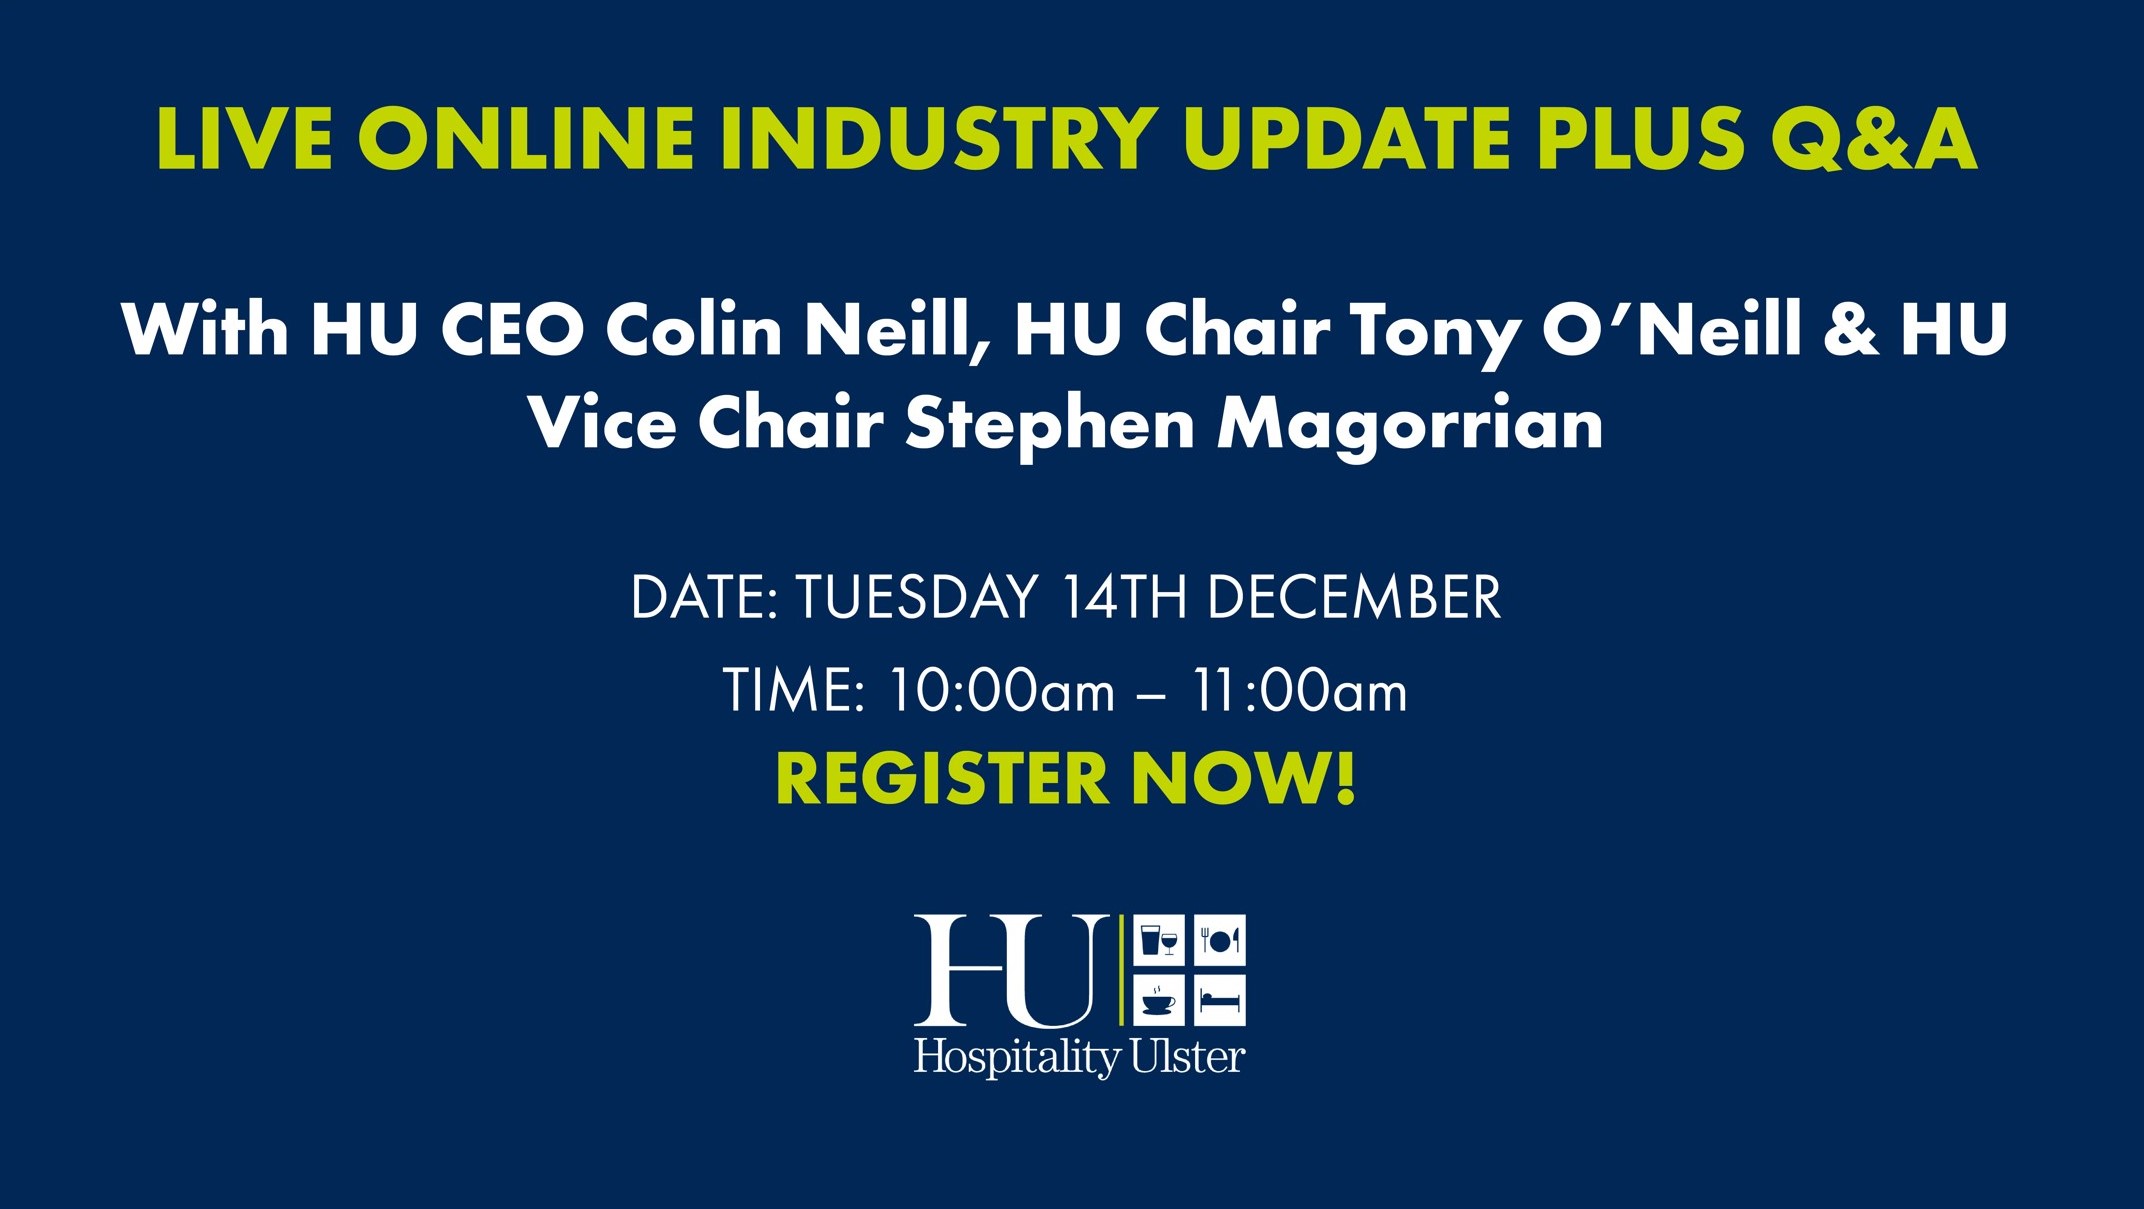 LIVE ONLINE INDUSTRY UPDATE PLUS Q AND A - TUES 14 DEC 10AM